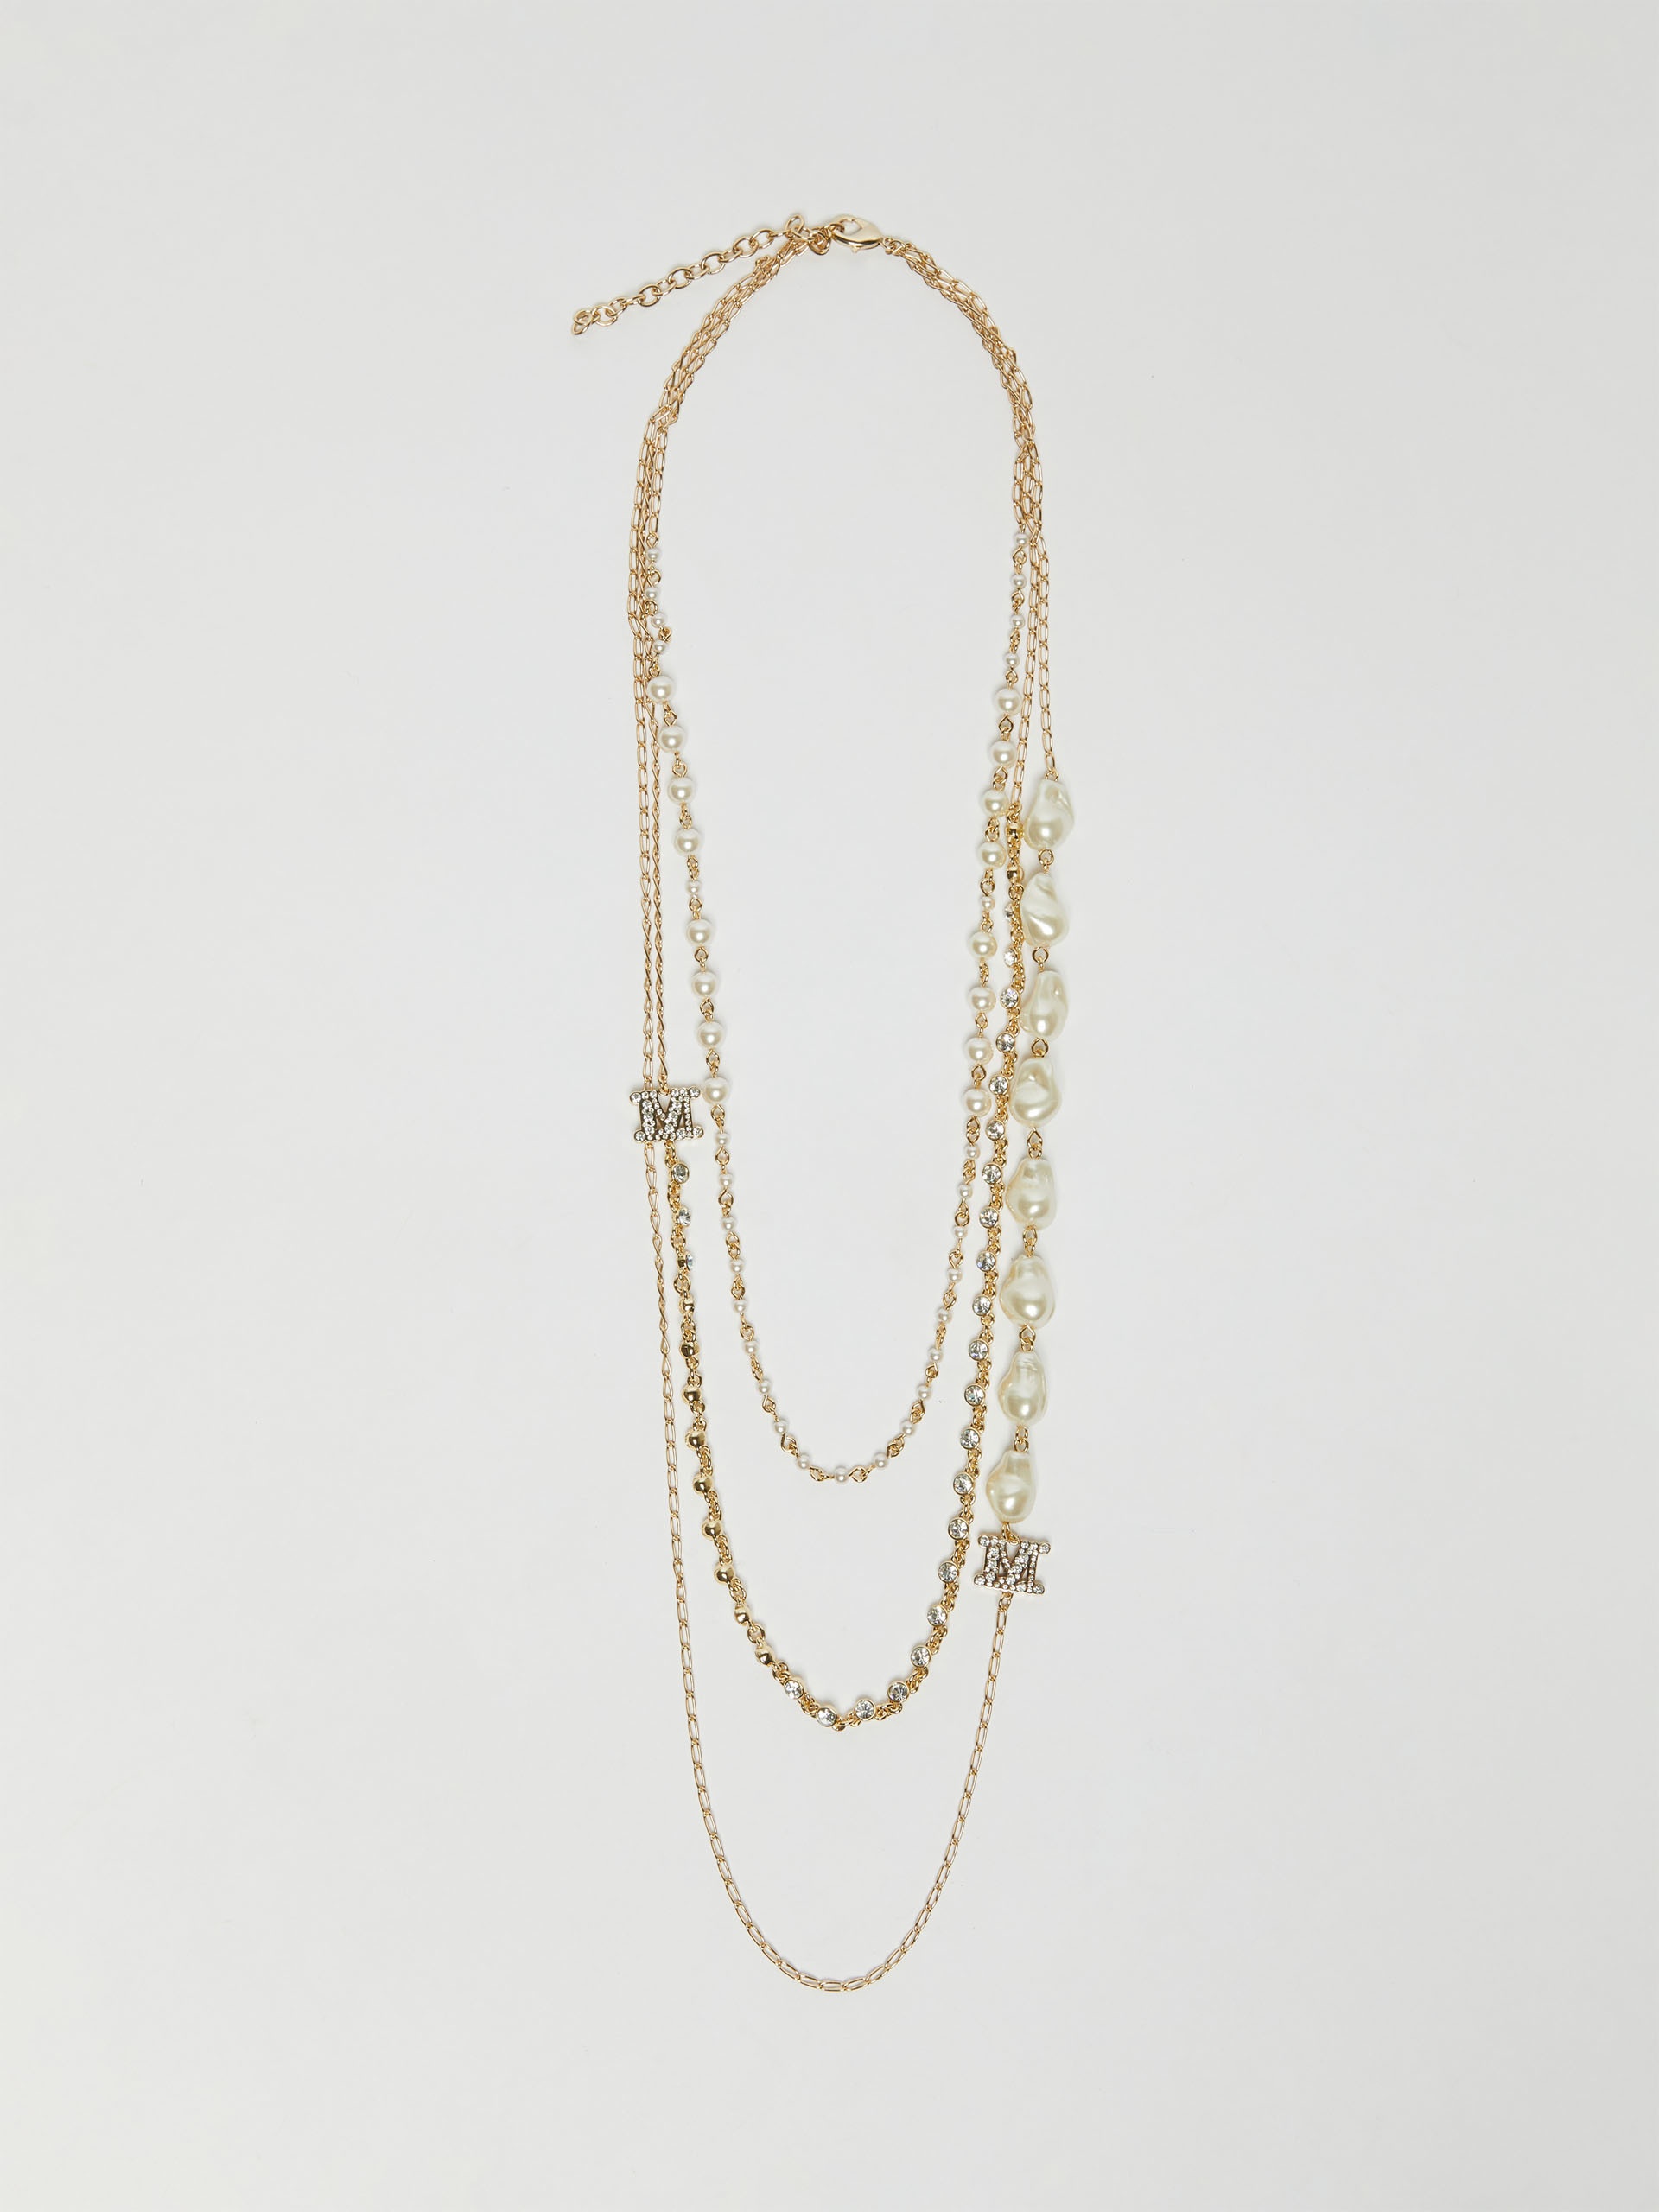 NECKY3 Multi-strand necklace with pearls and rhinestones - 1